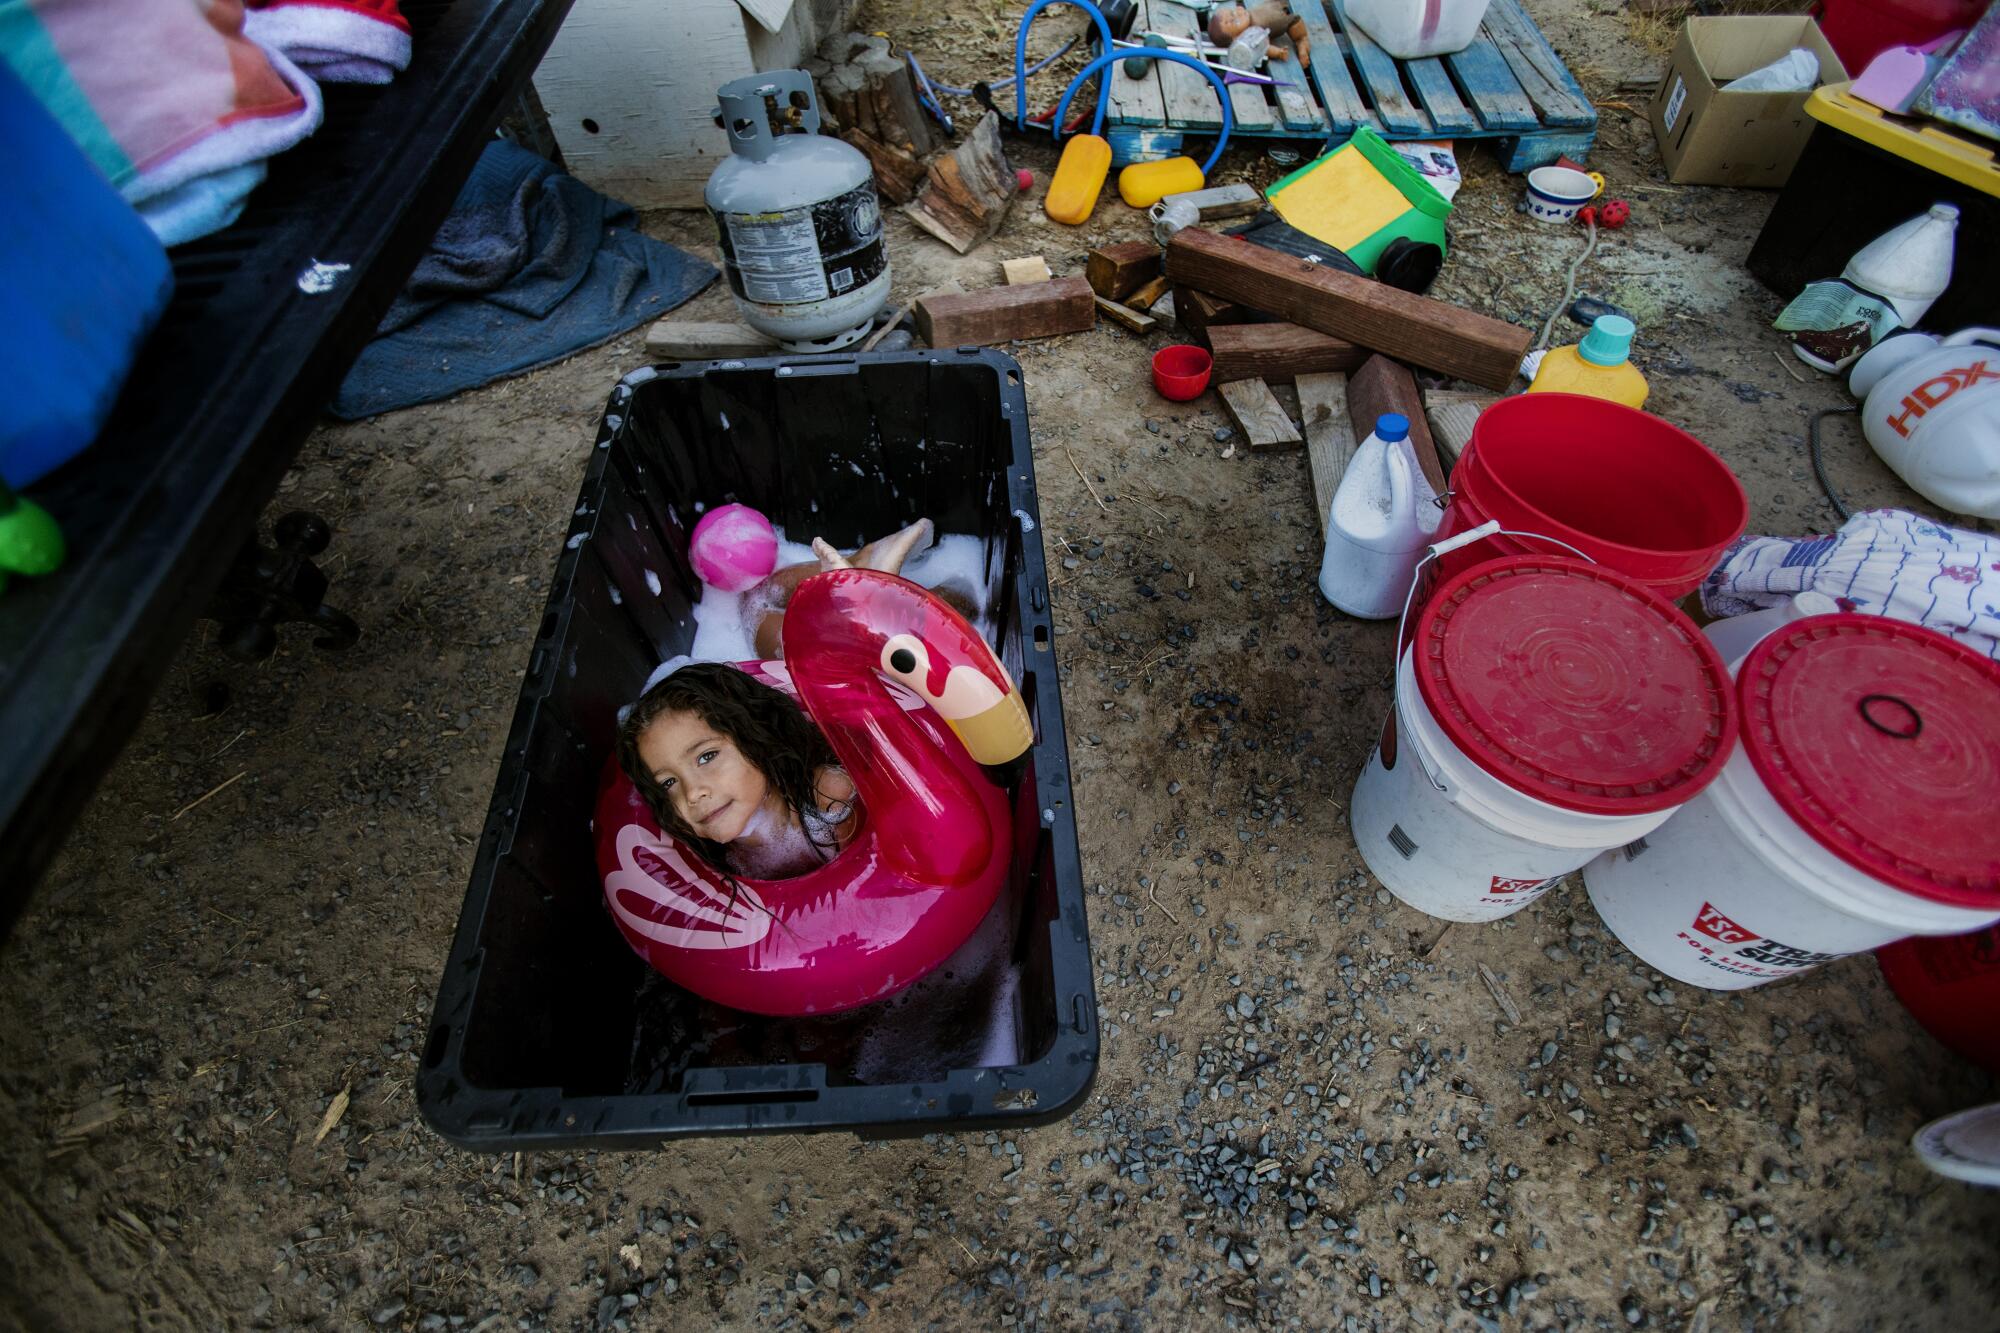 A little girl plays with an inflatable flamingo inside a bin filled with water.